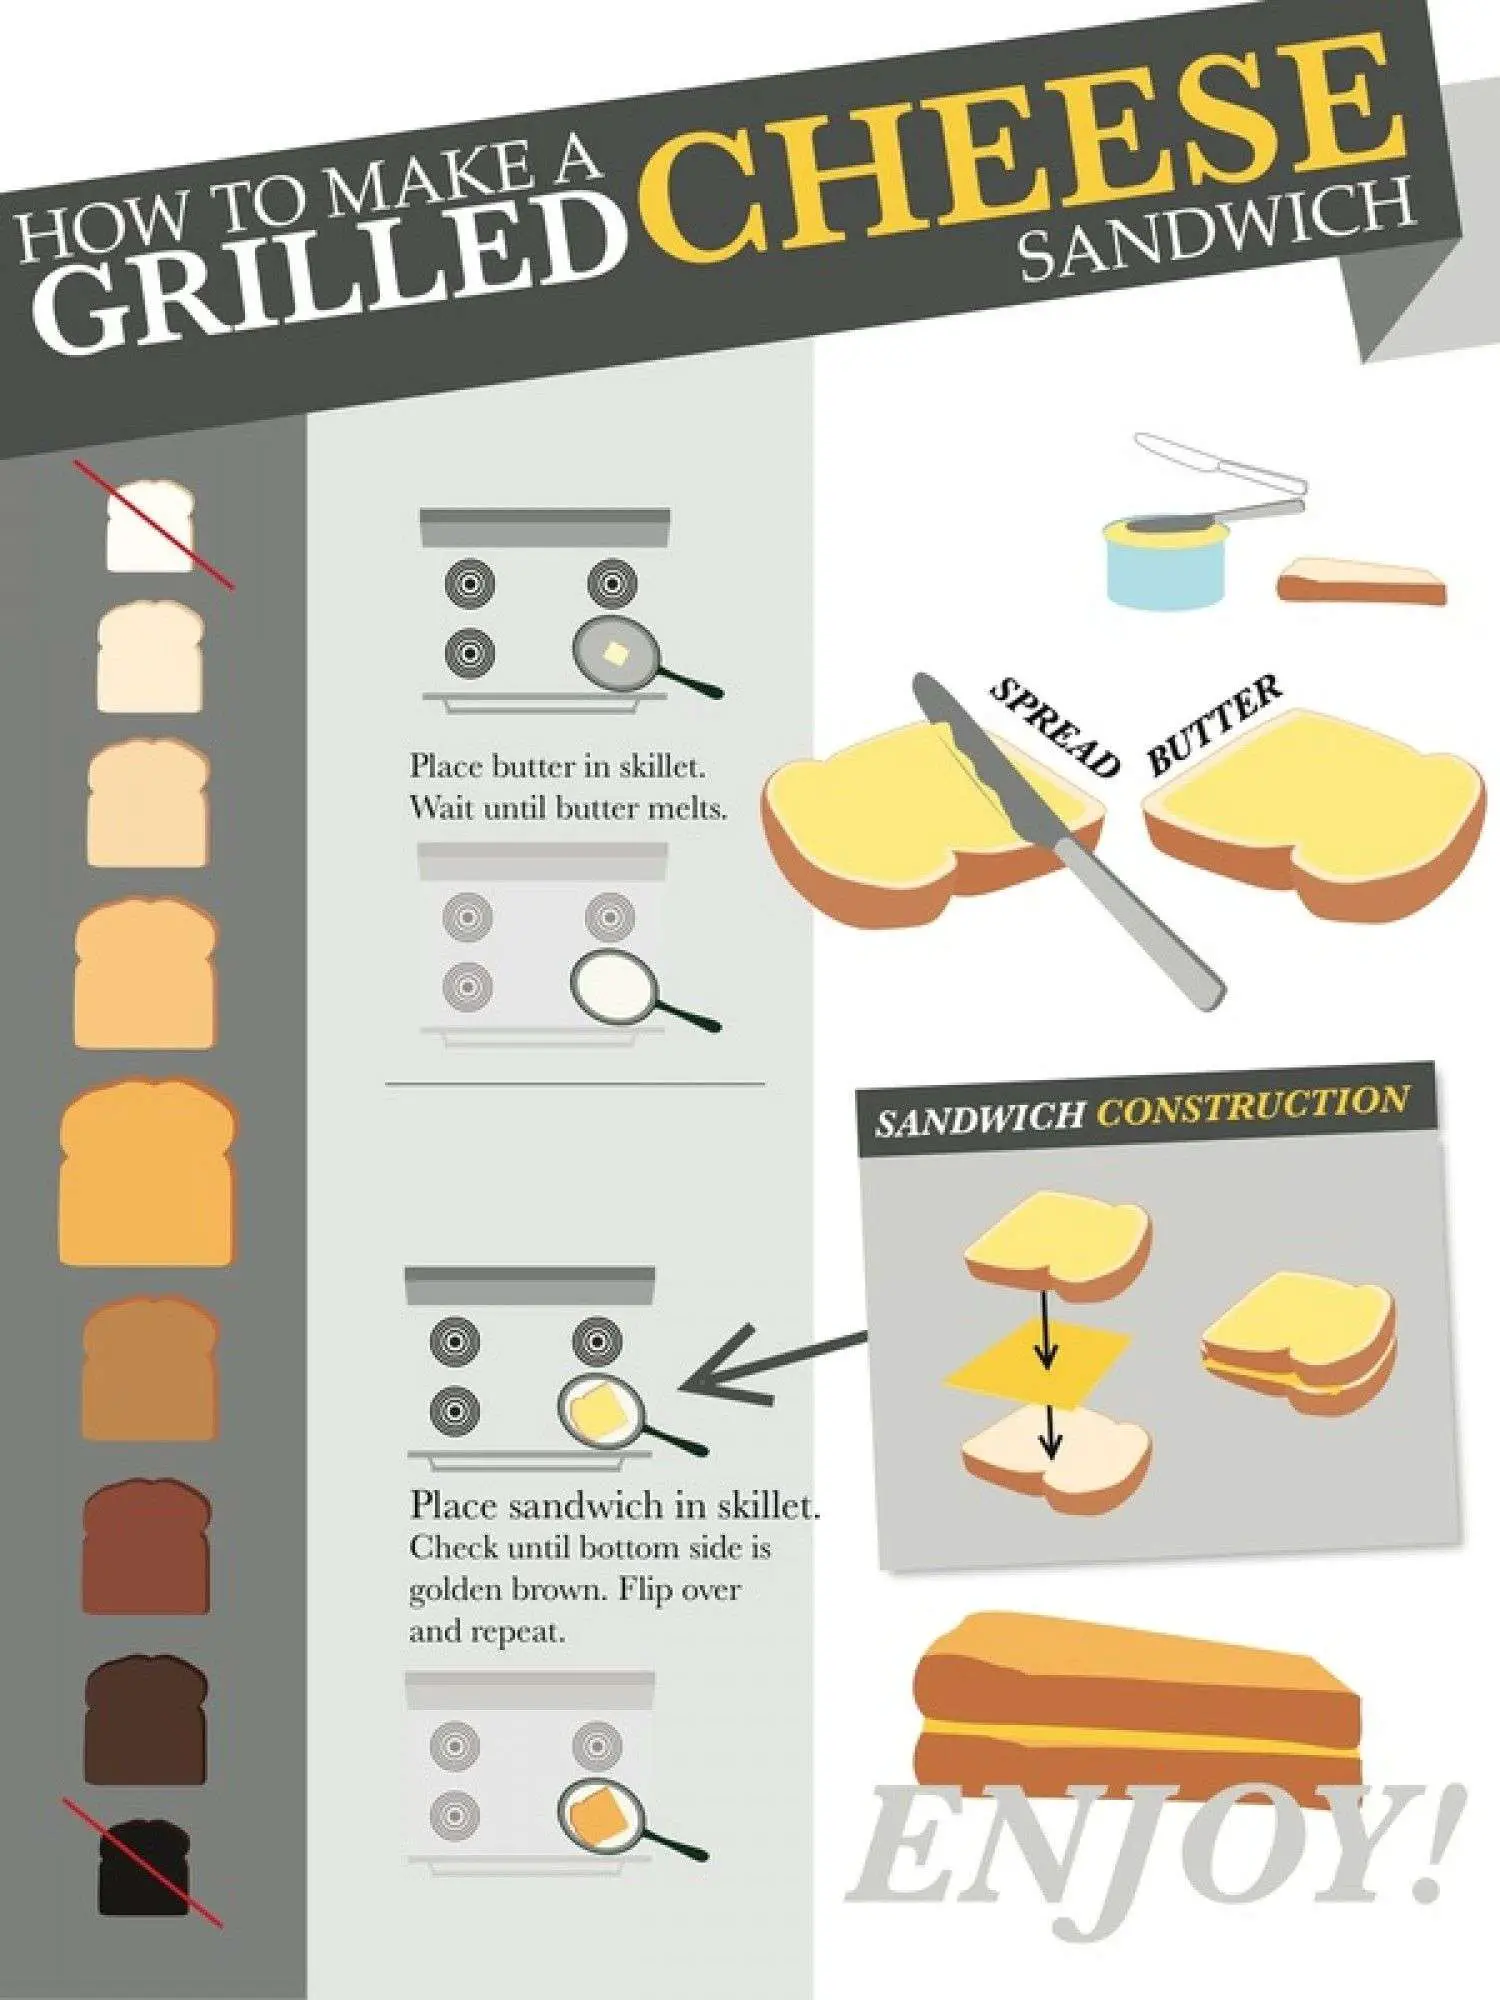 How to Make a Grilled Cheese Sandwich Infographic